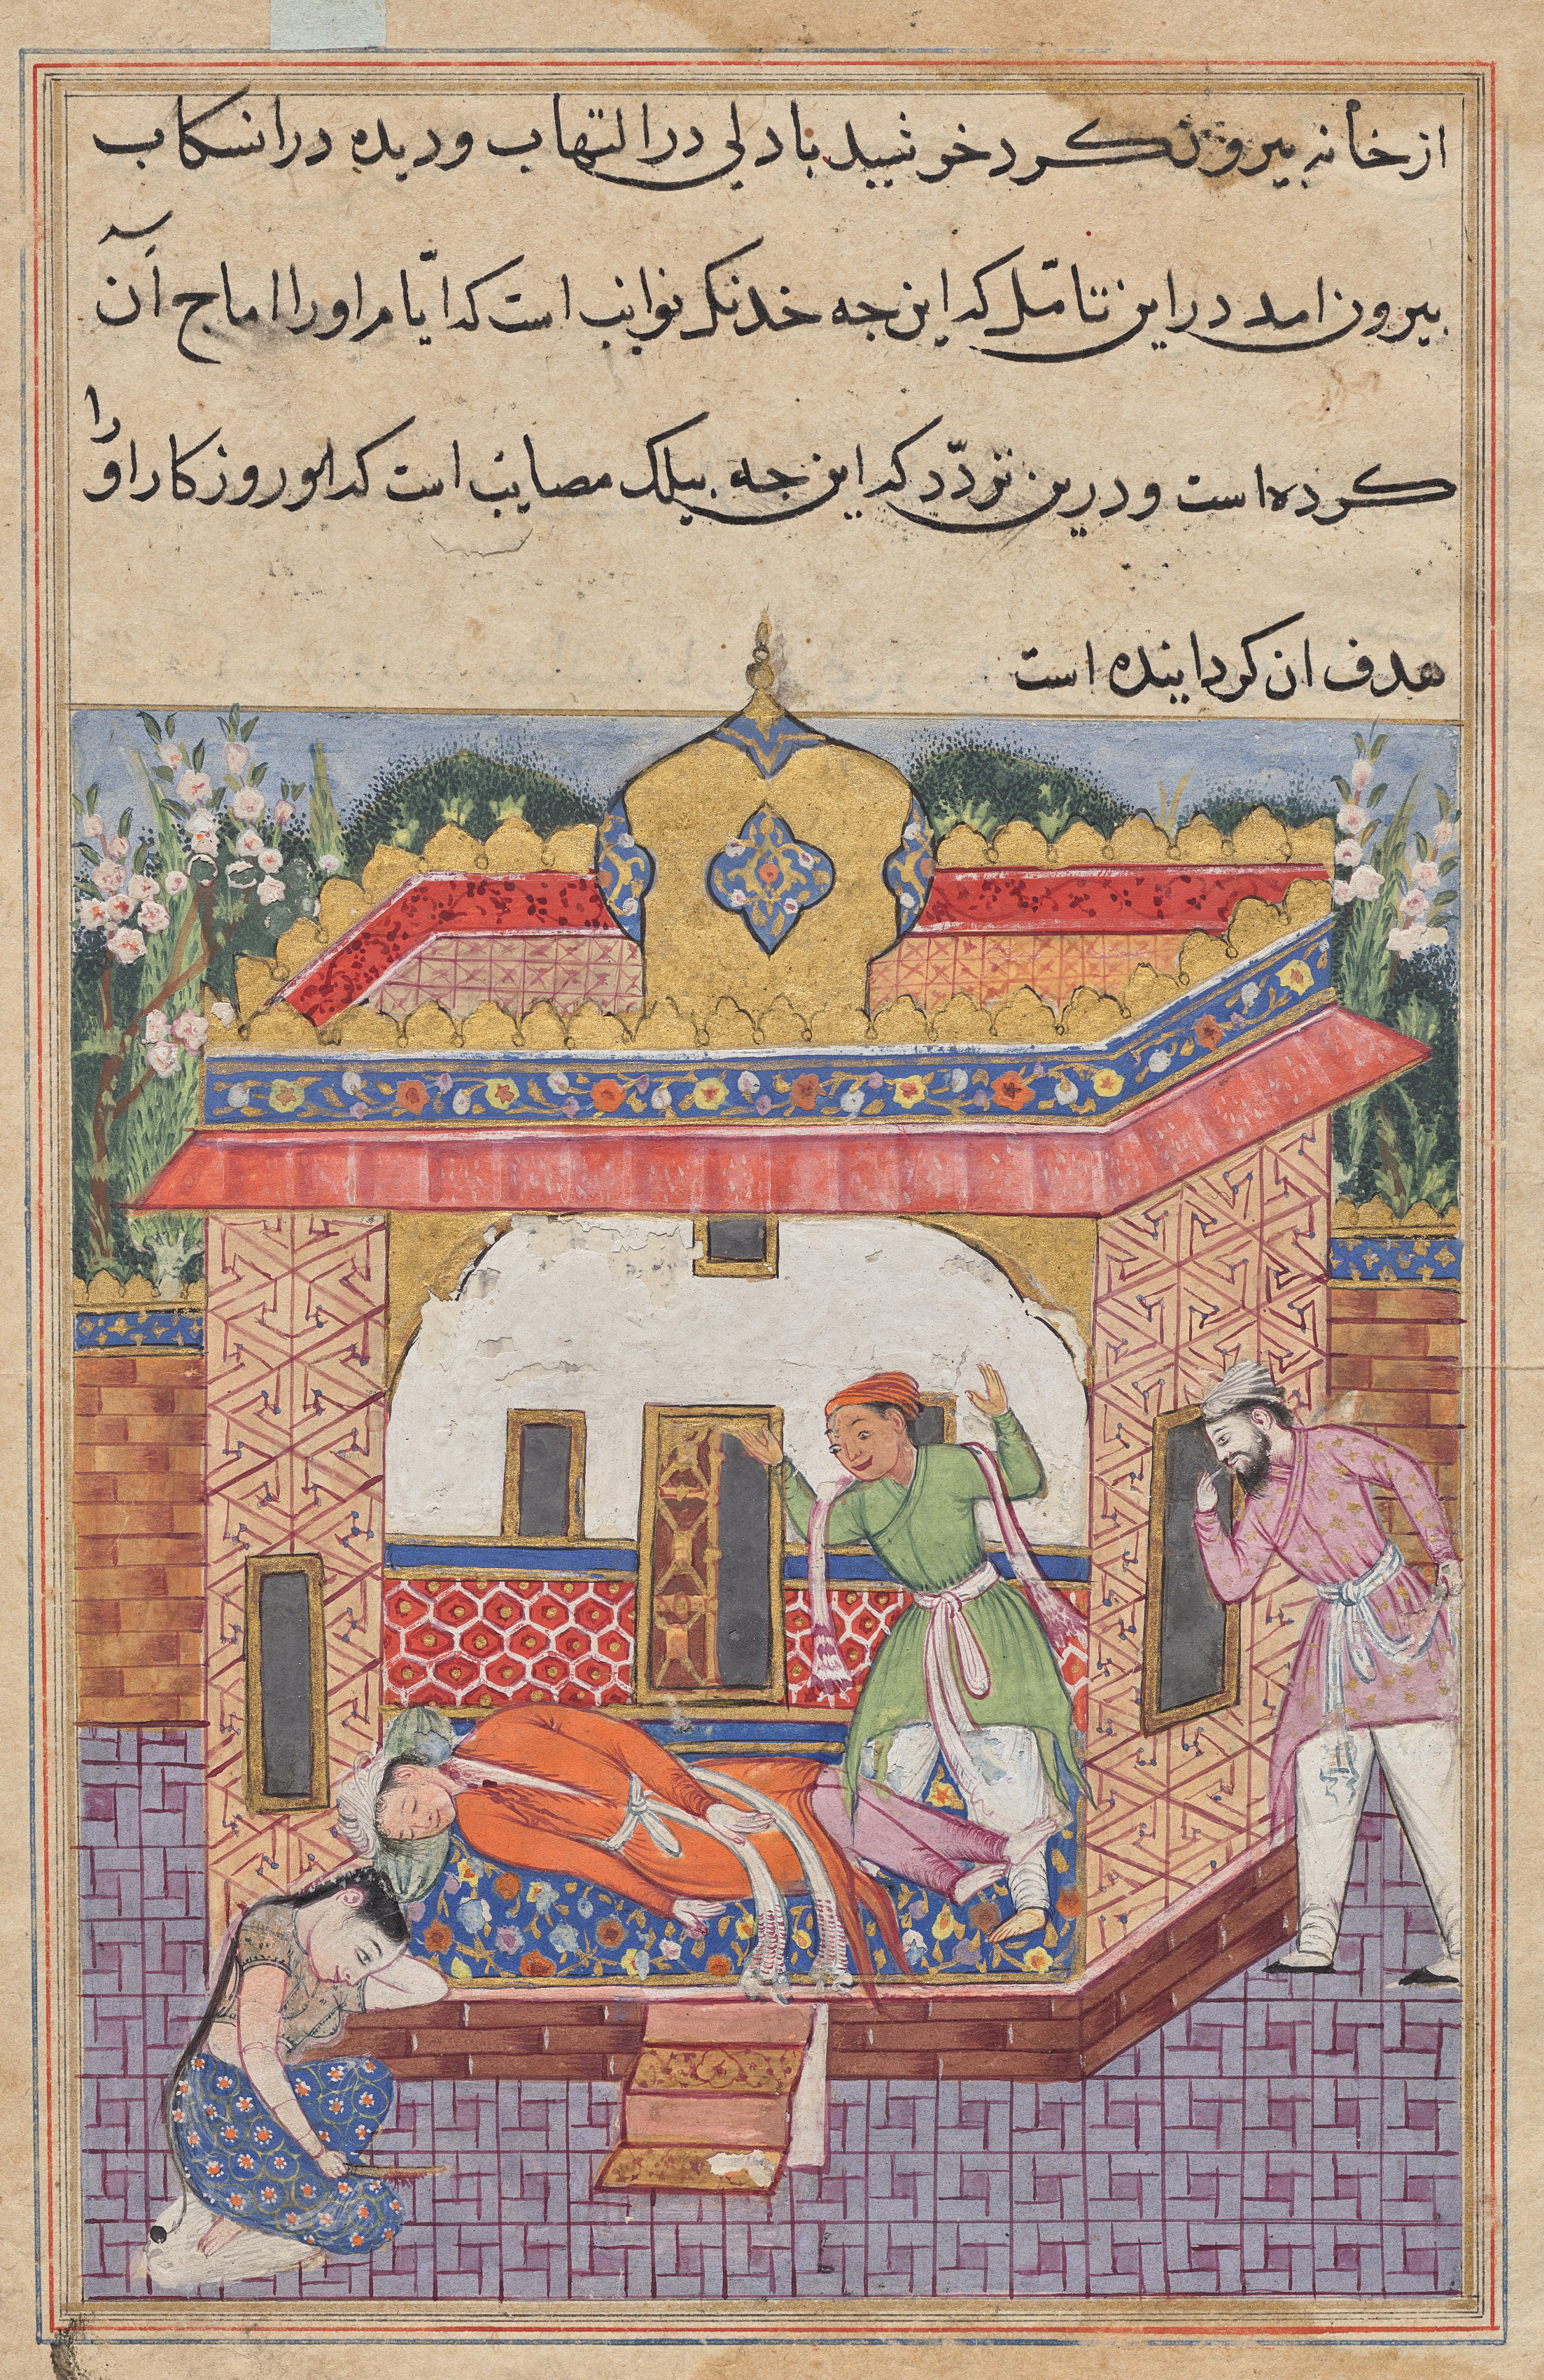 Latif, who has murdered his brother, falsely accuses Khurshid of the deed, from a Tuti-nama (Tales of a Parrot): Thirty-second Night